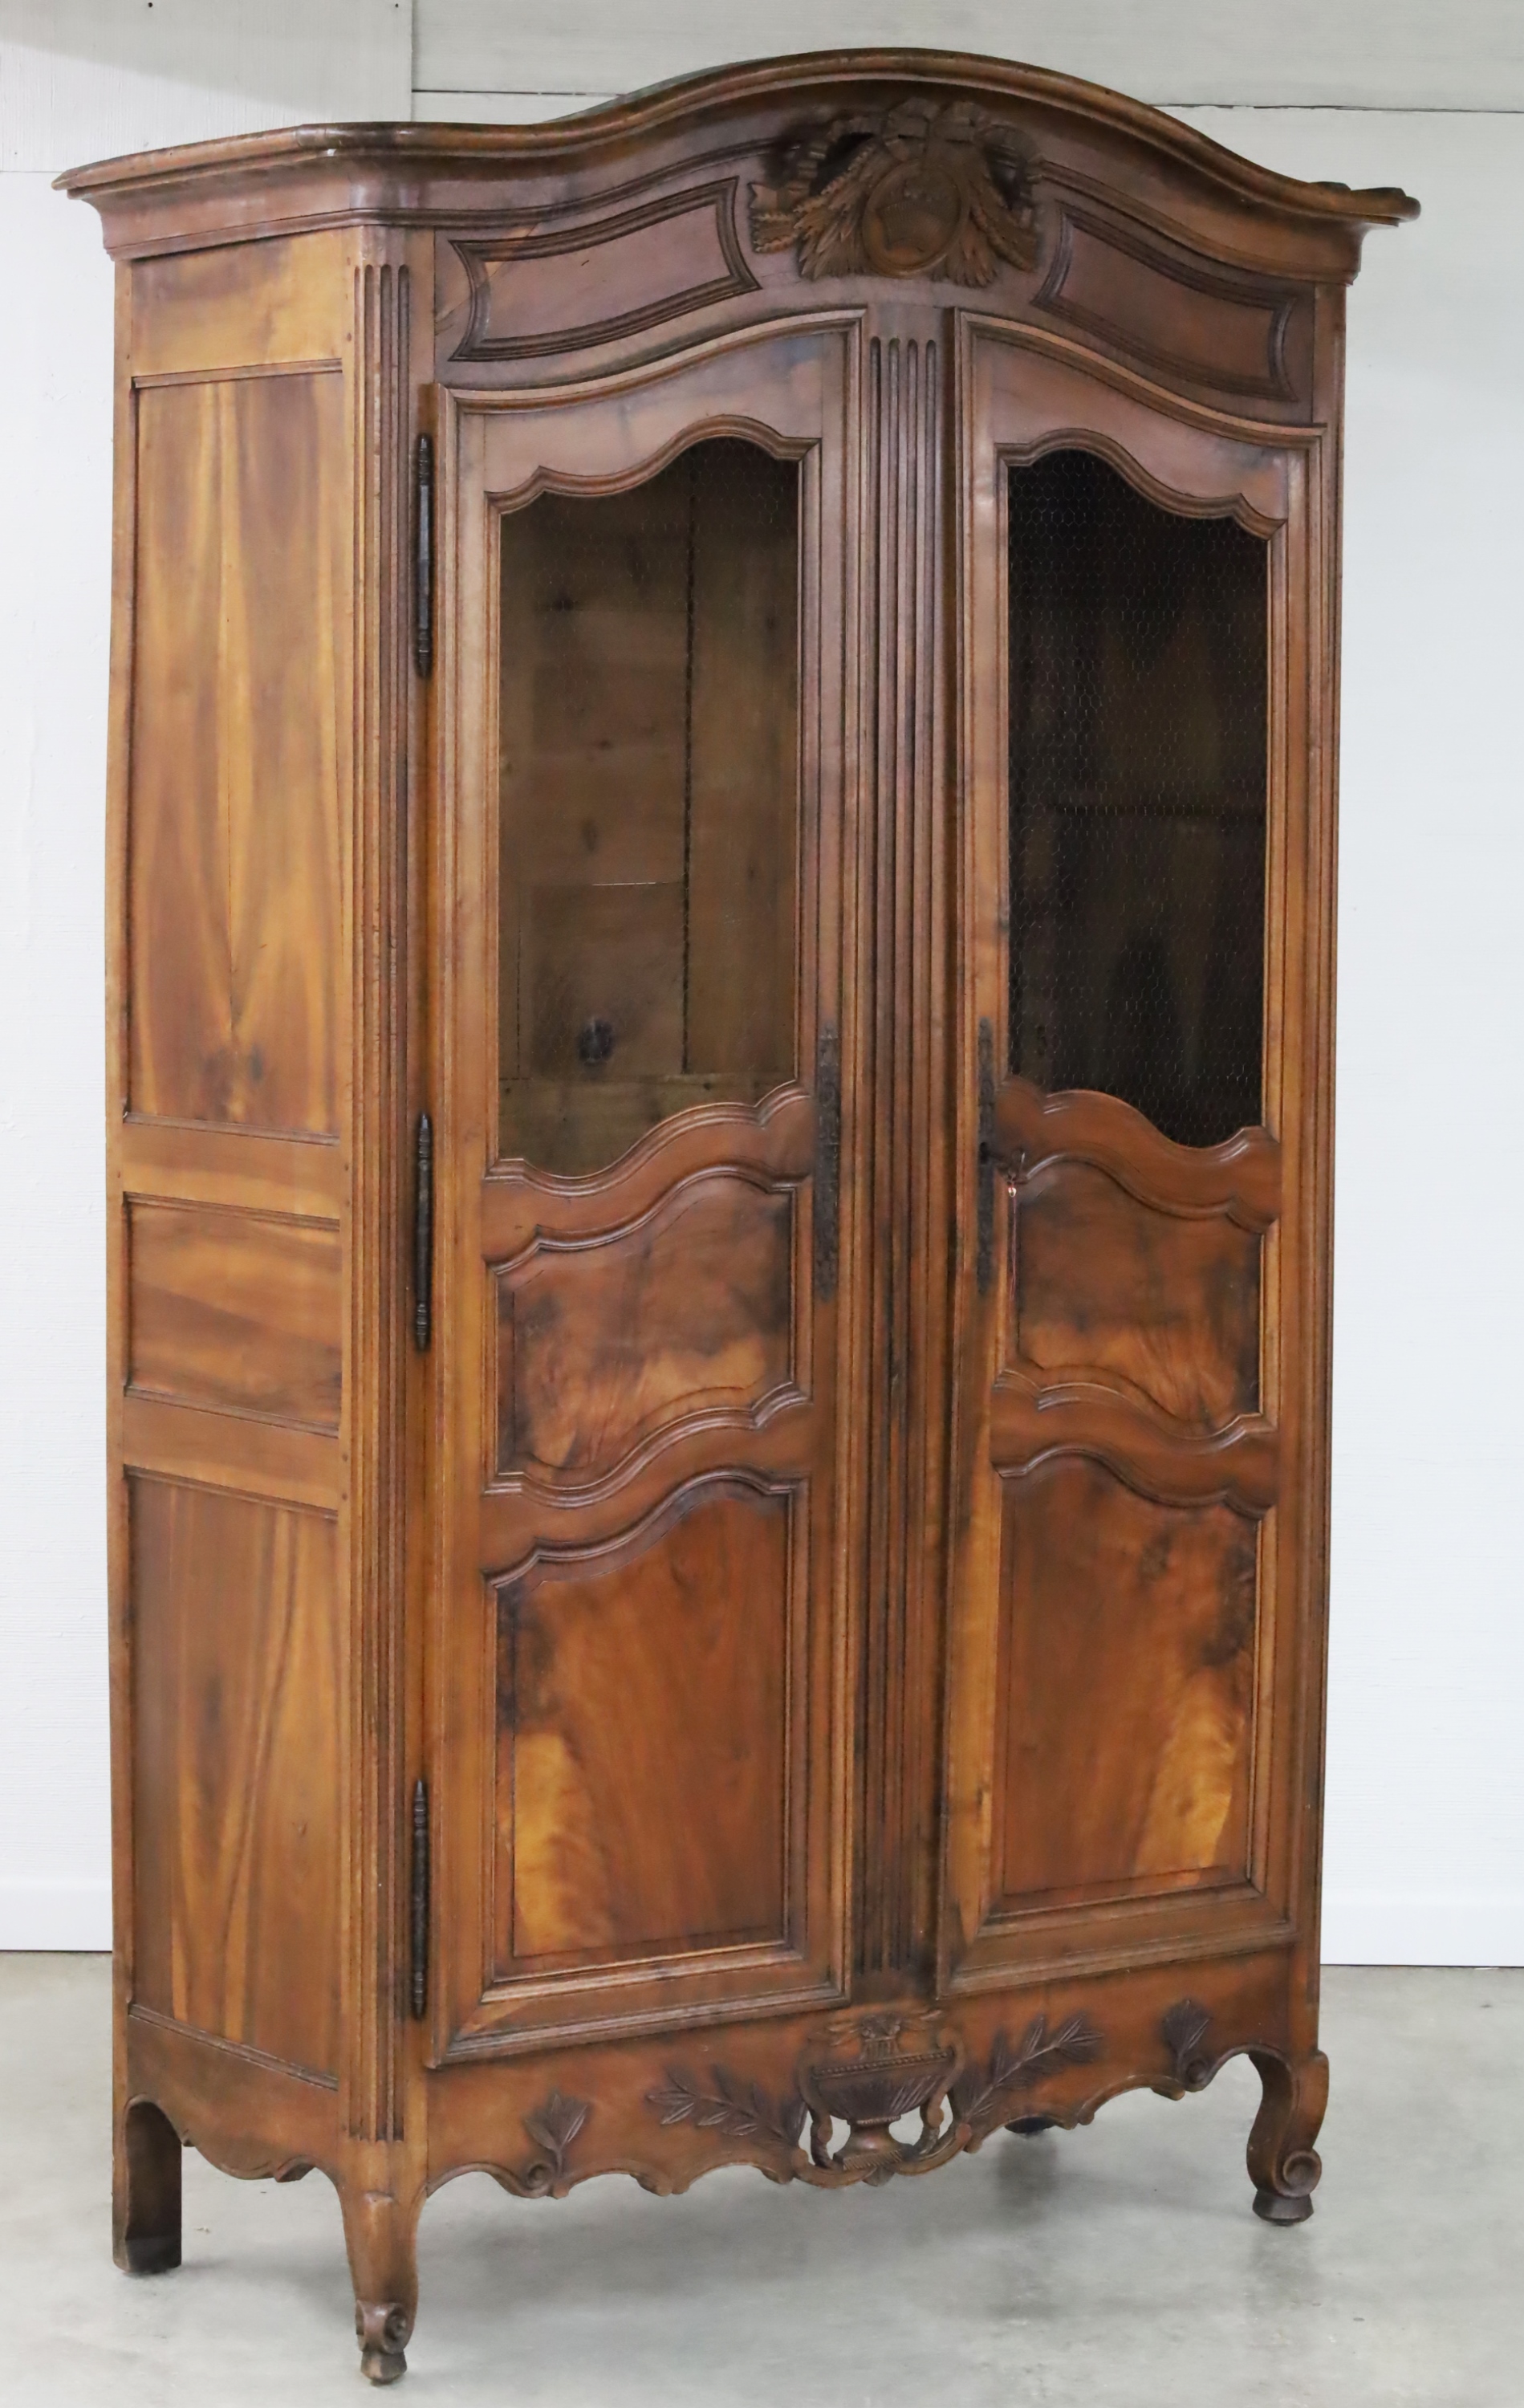 LOUIS XV STYLE CARVED WALNUT ARMOIRE 2b7a76